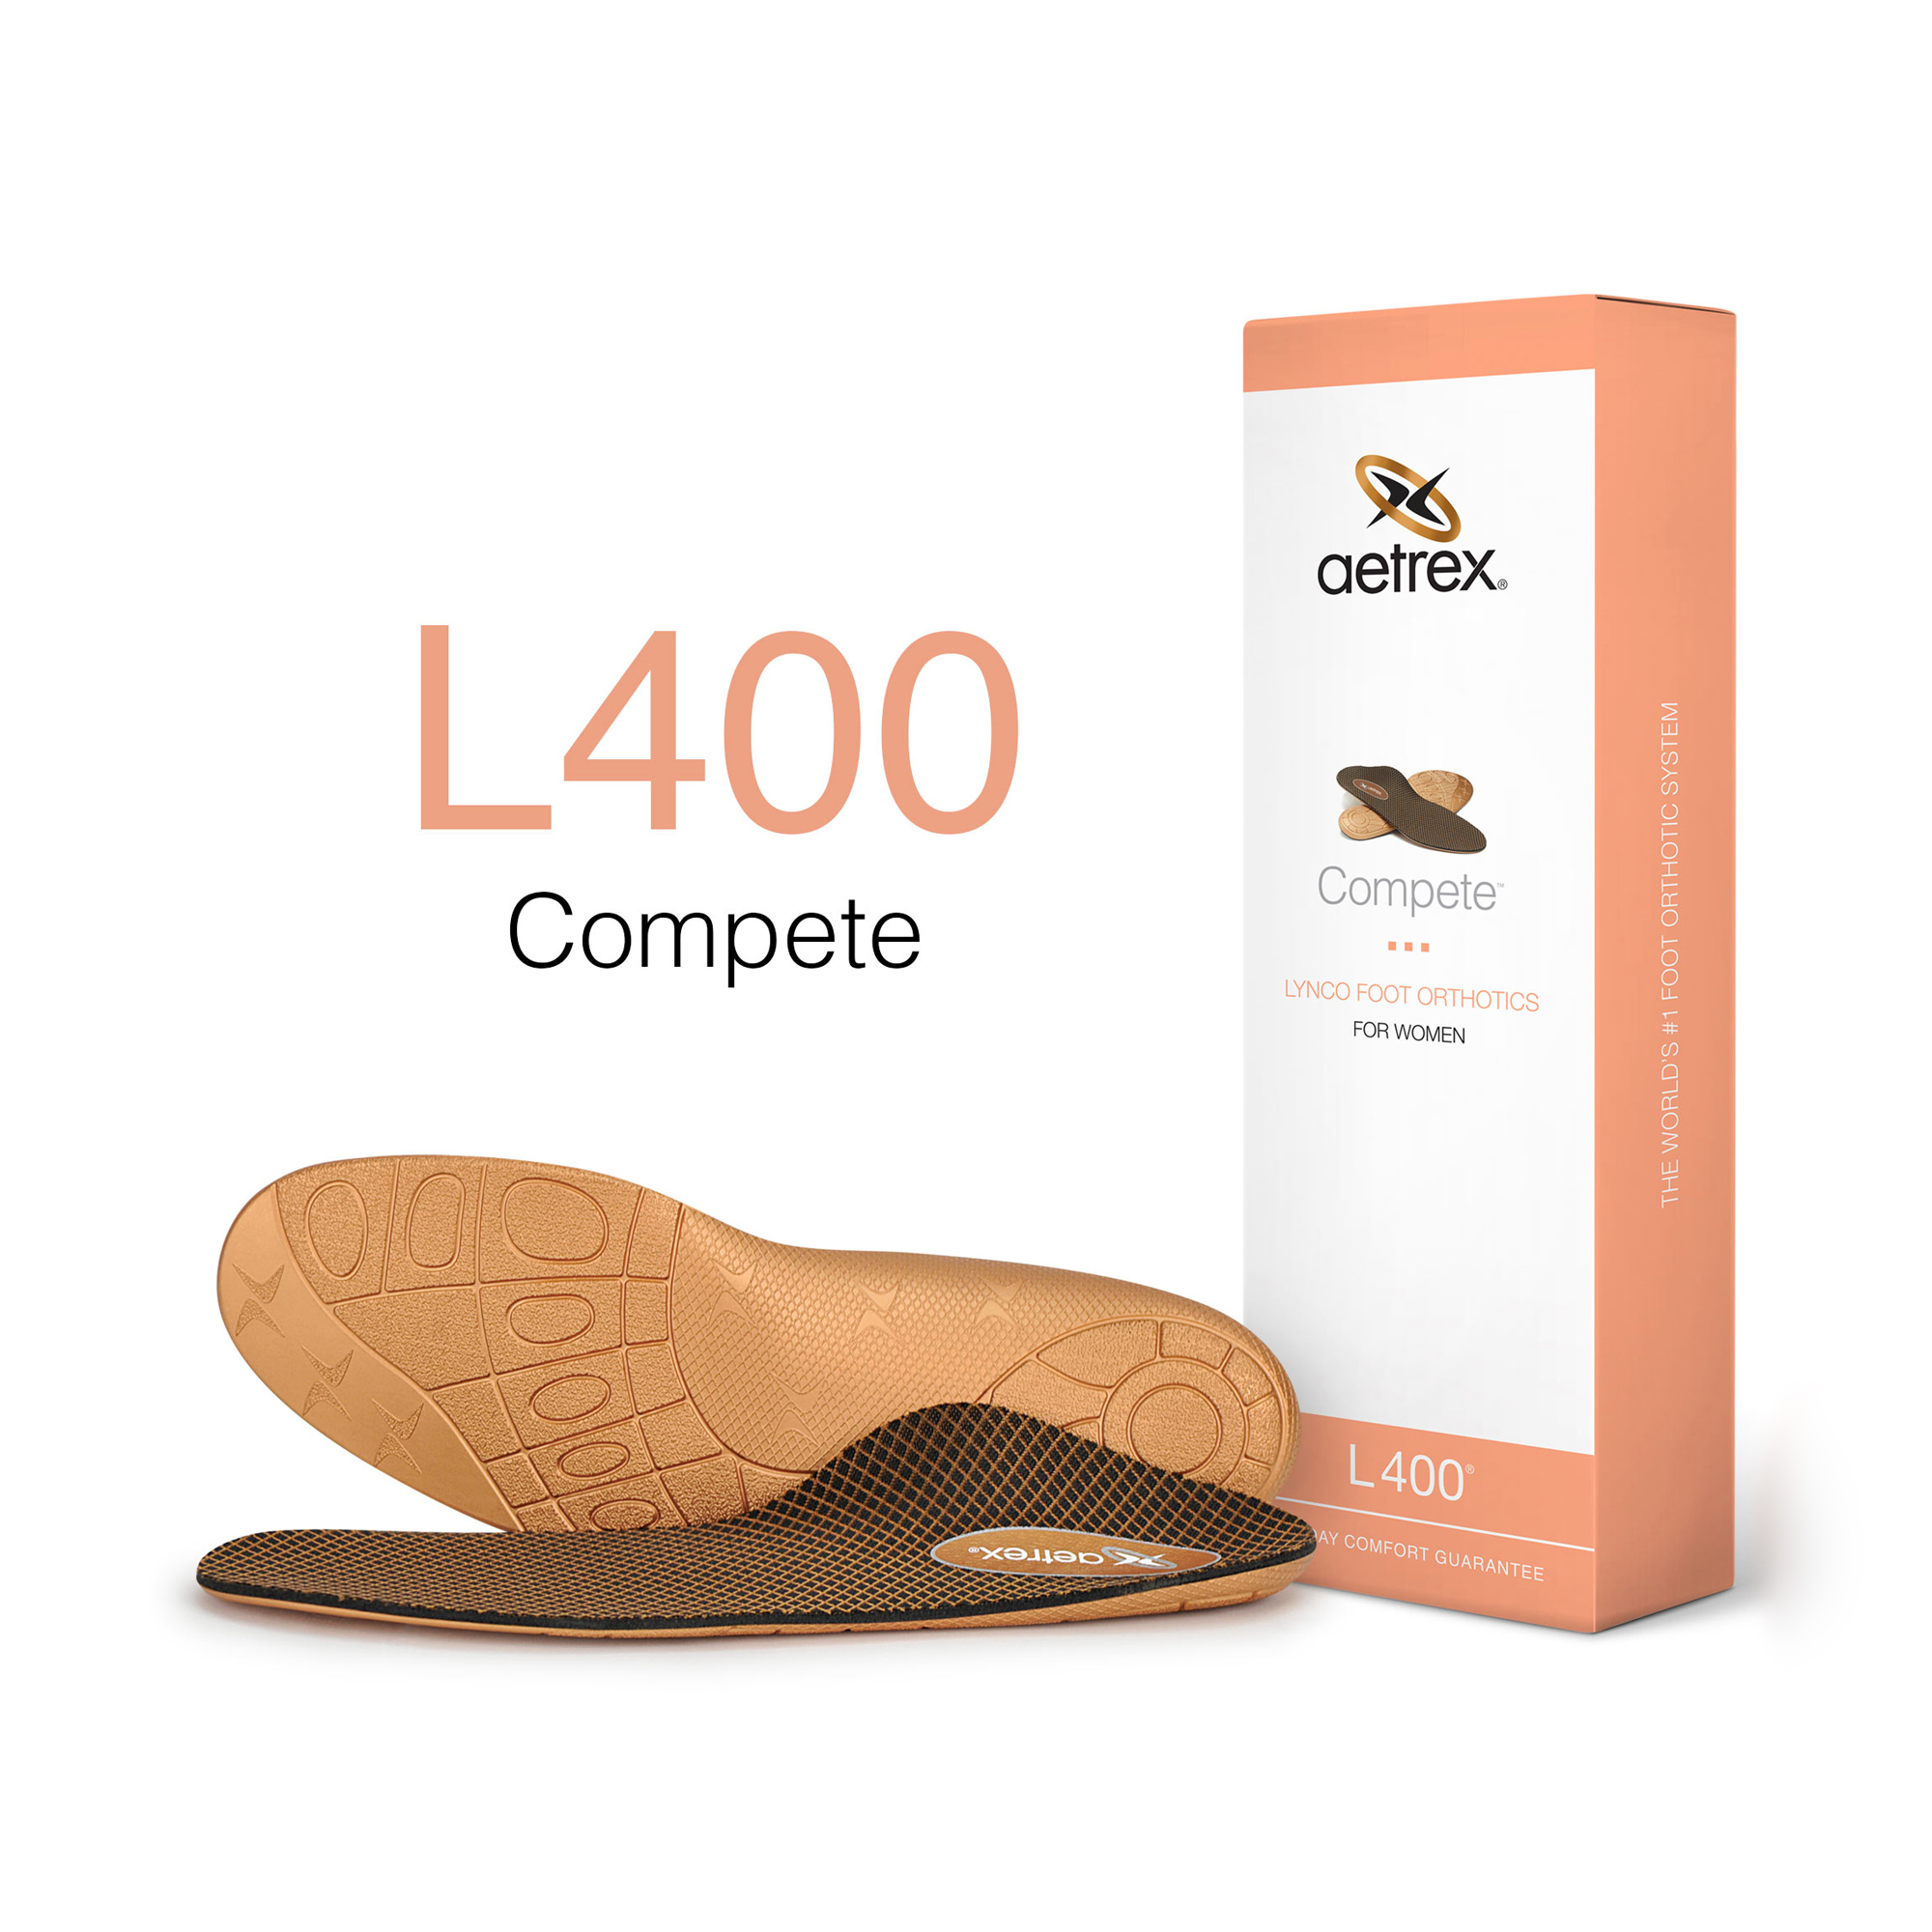 Women's Sport/Compete - Insoles for 